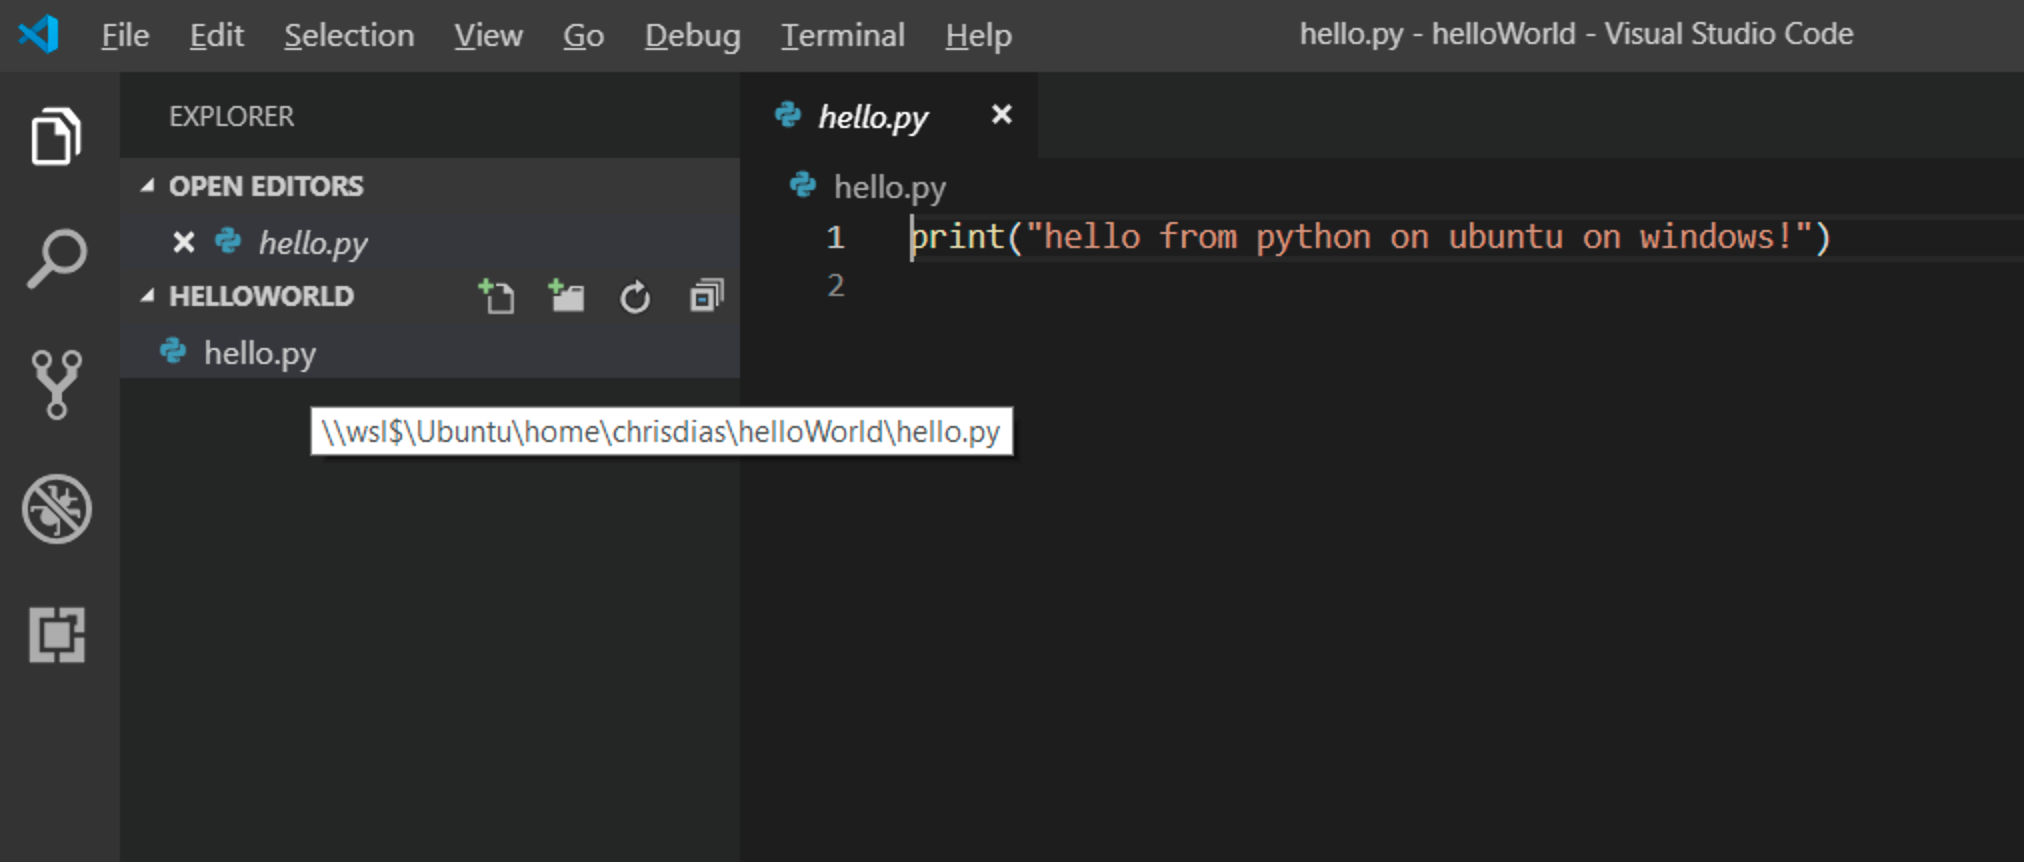 The VSCode IDE navigated to the WSL mount location